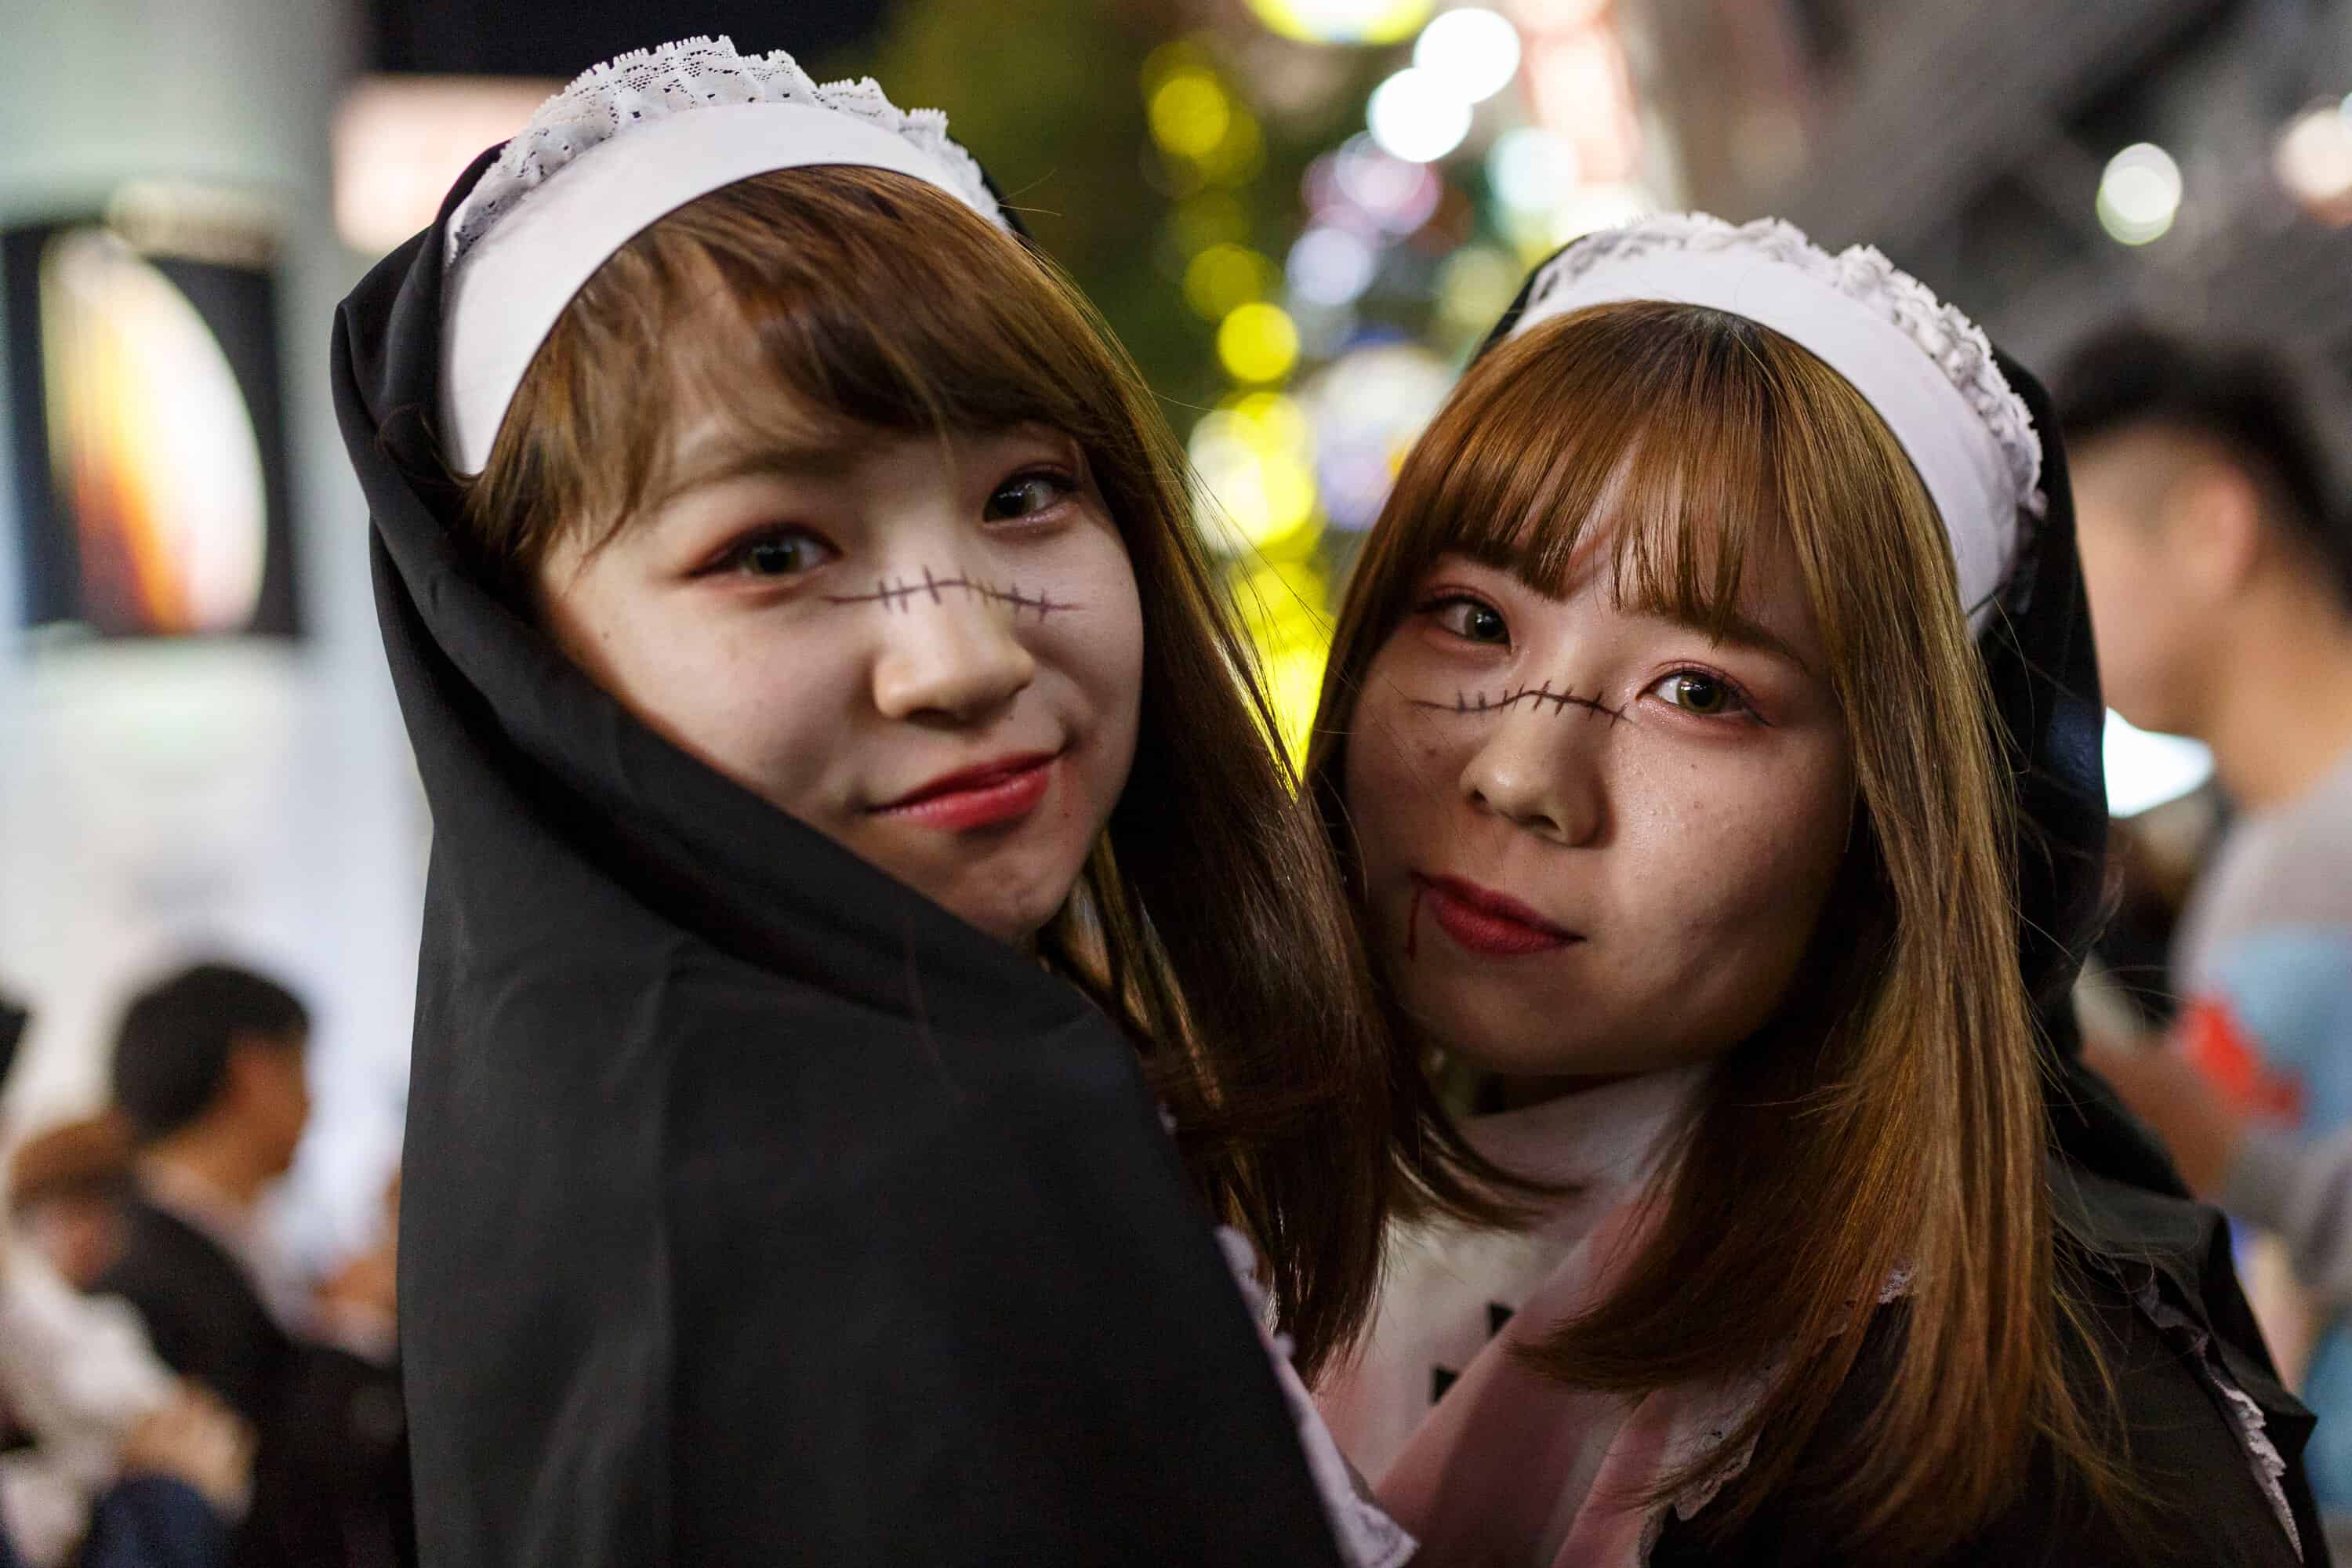 The Best Ways To Celebrate Halloween in Japan